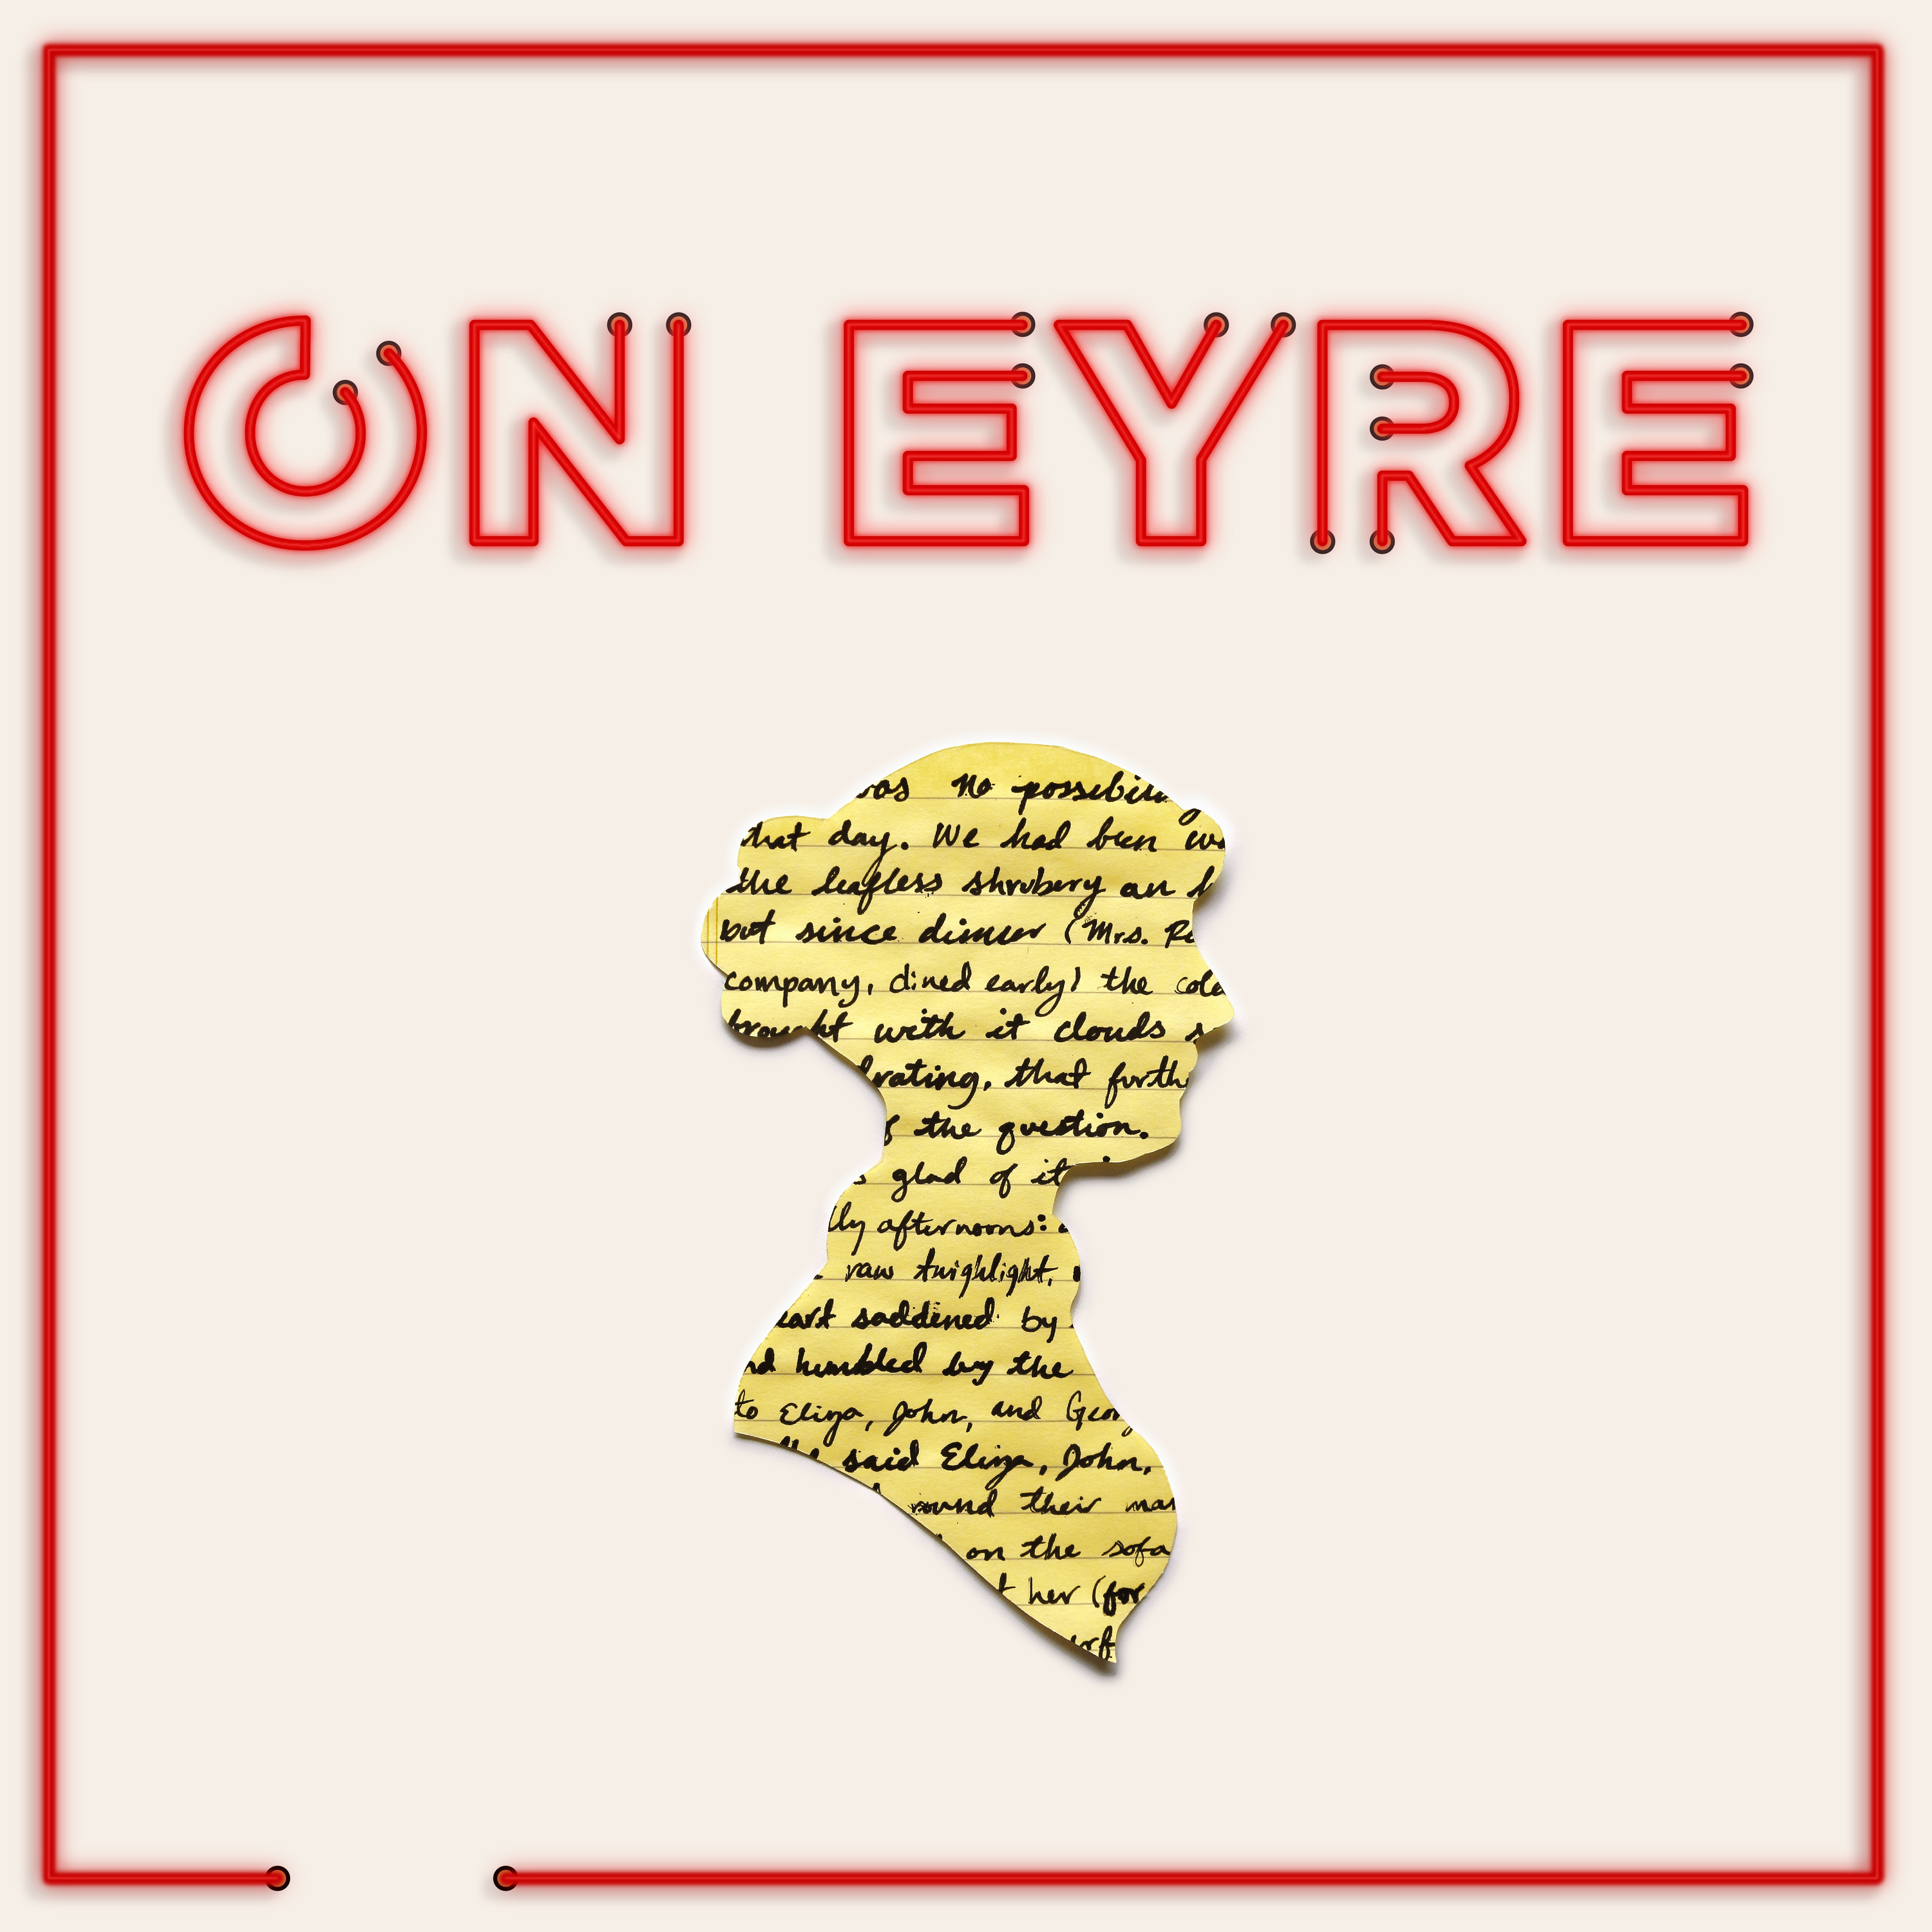 One Eyre: He Wanted to Train Me (Chapters 34 + 35)